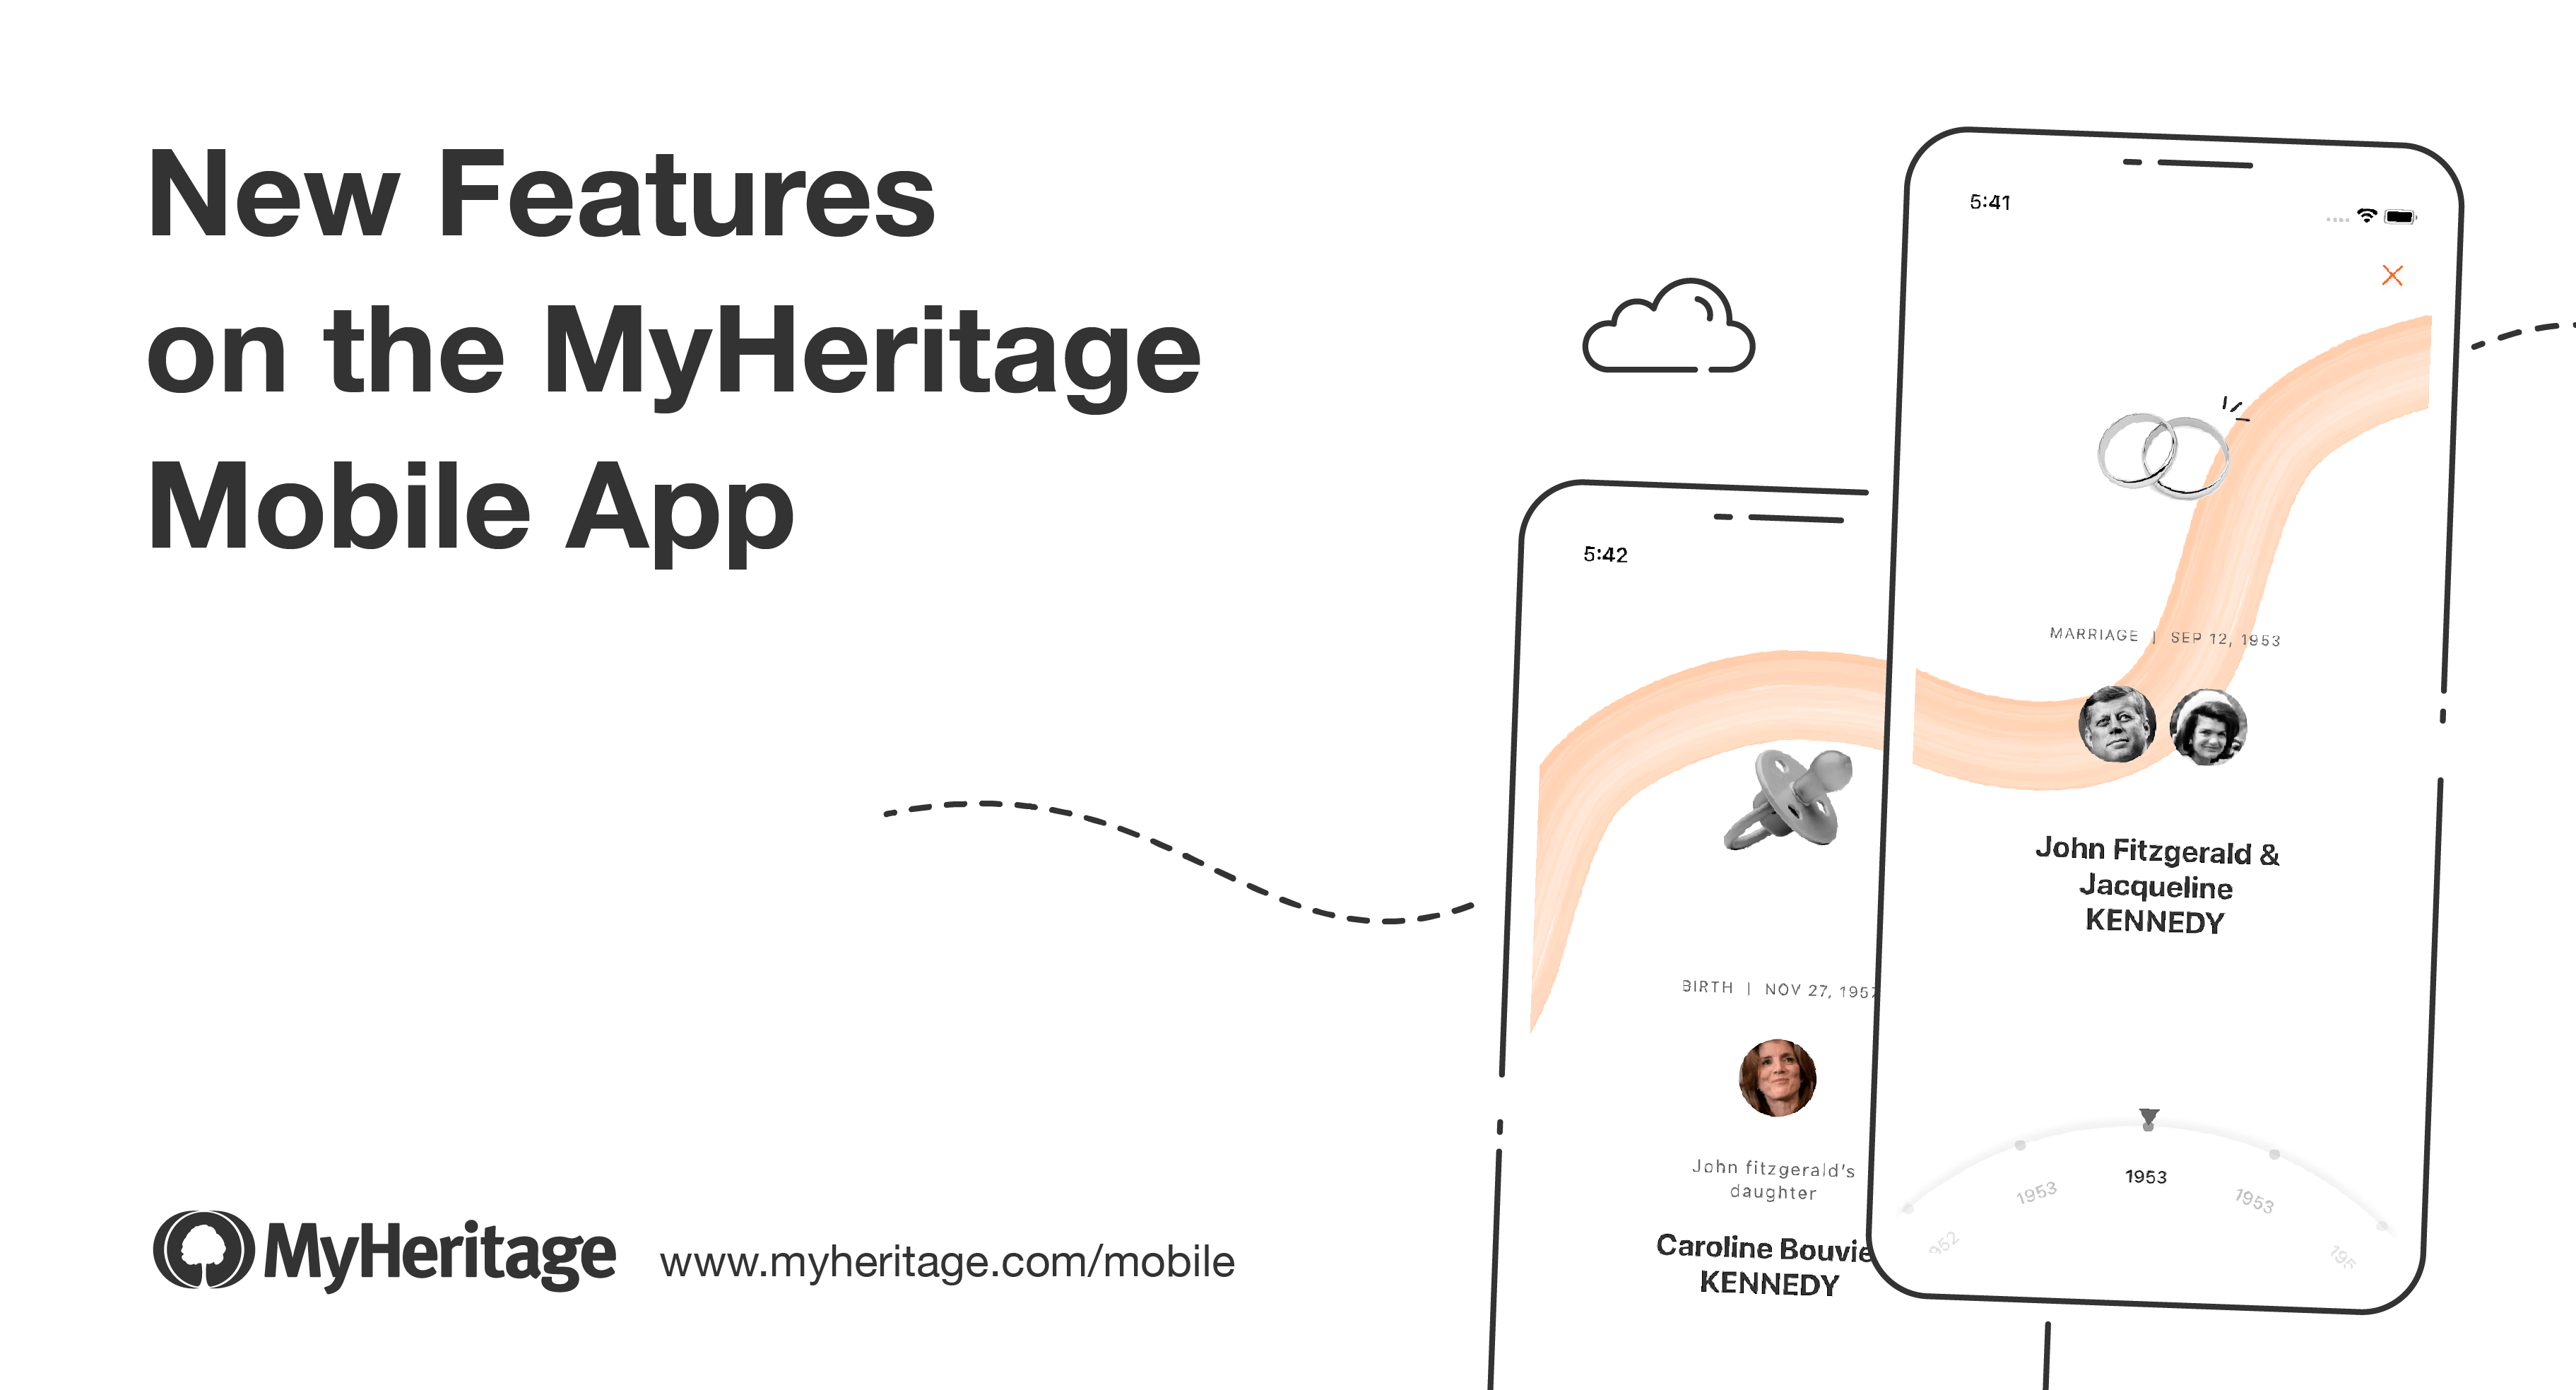 New Update to the MyHeritage Mobile App